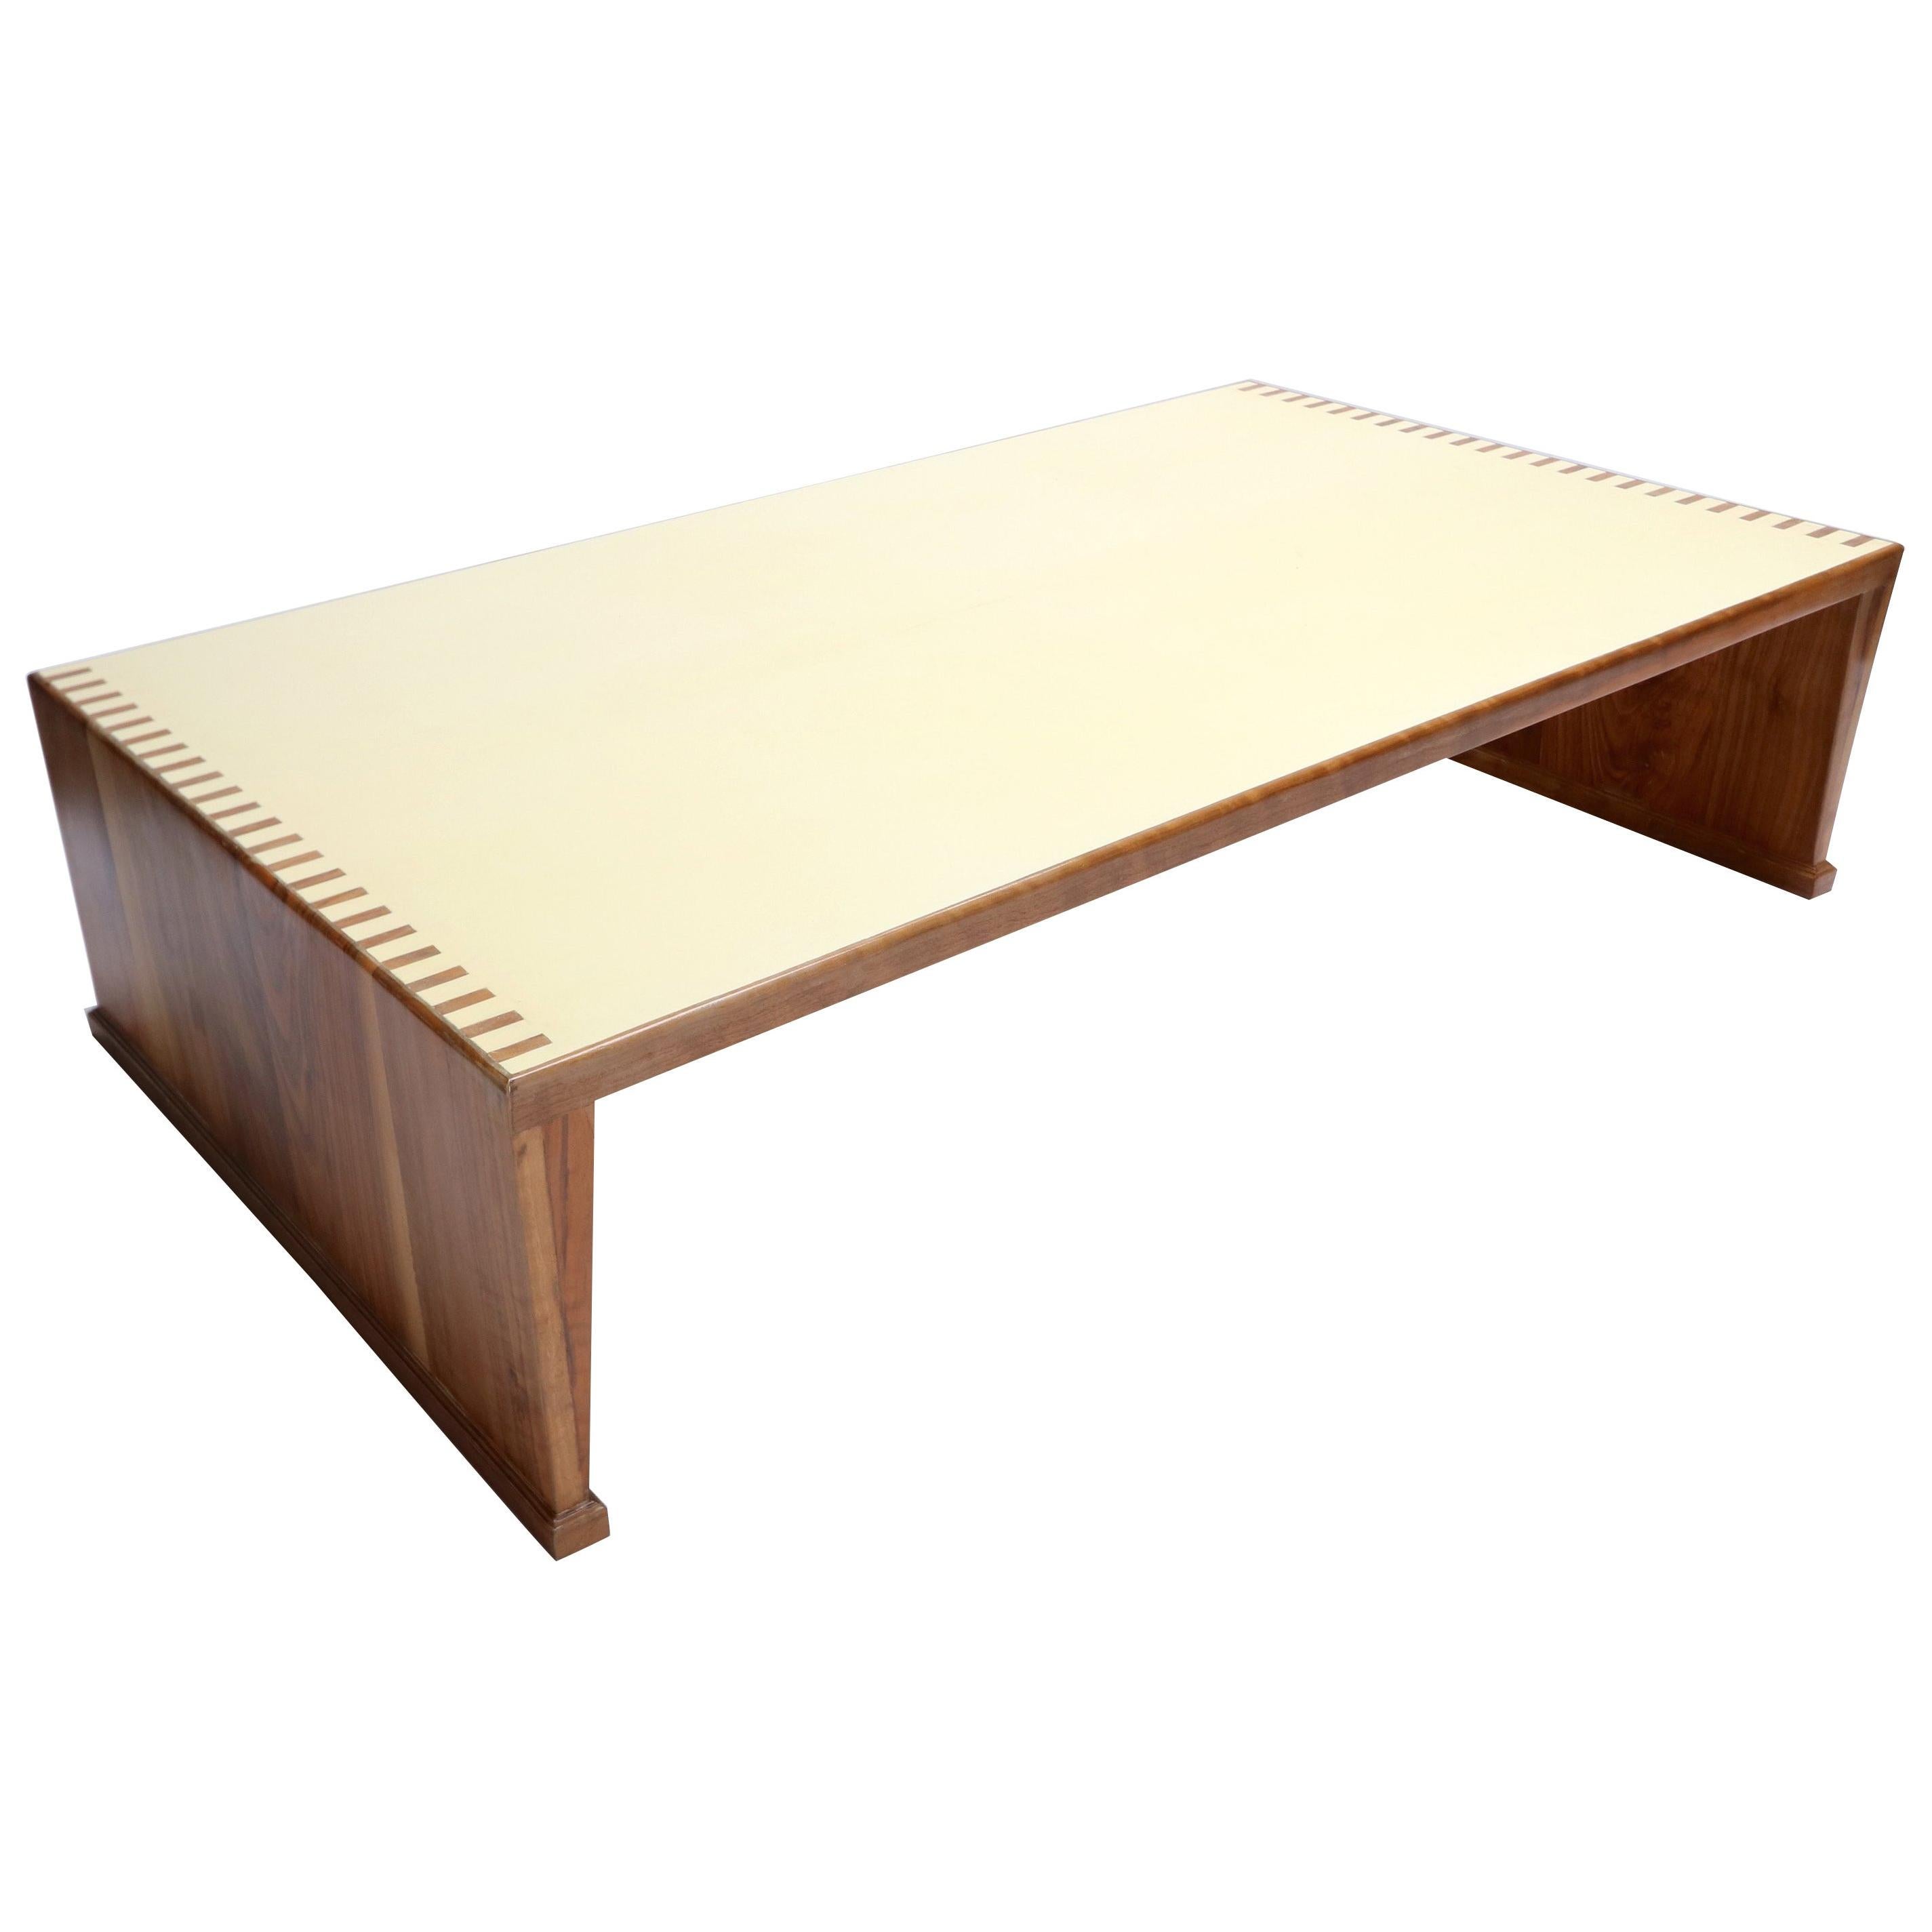 Custom Walnut Coffee Table with Lacquered Top